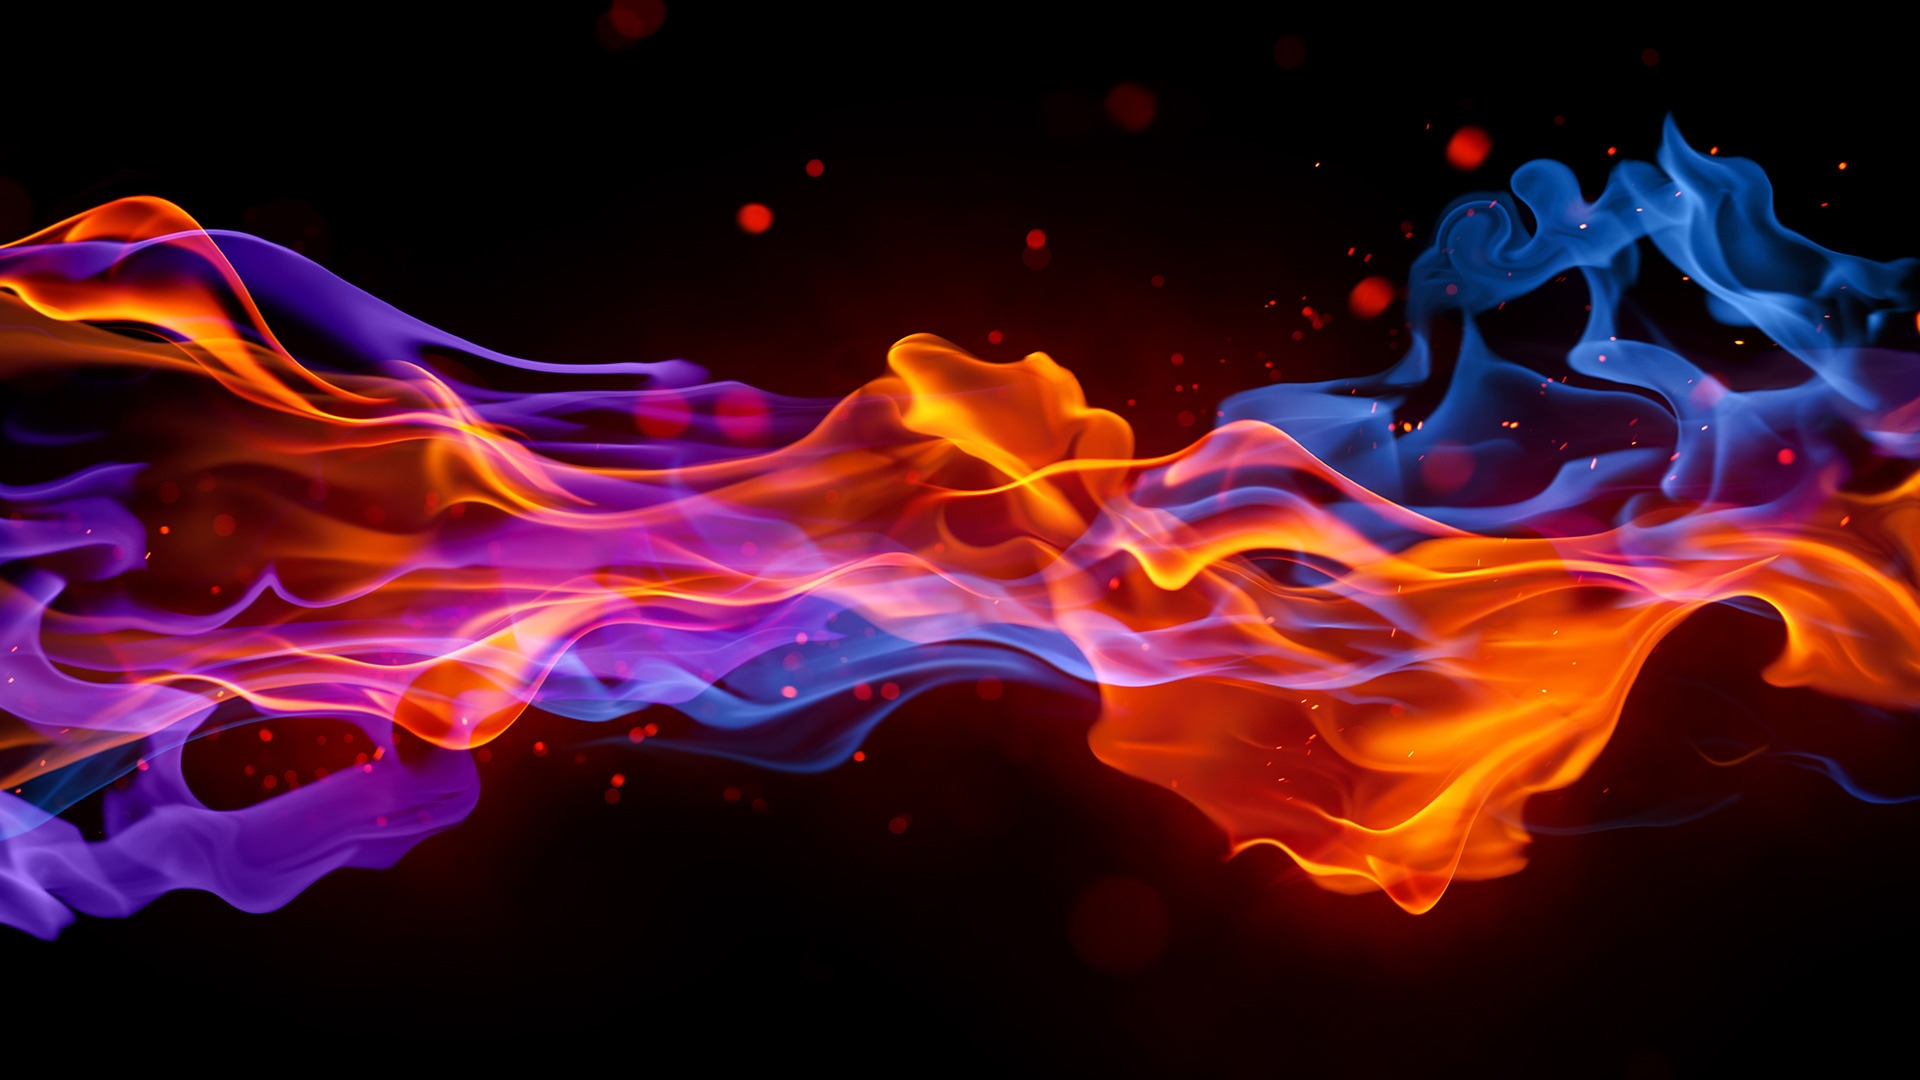 Fire Bright Colorful Background Wallpaper Full HD 1080p